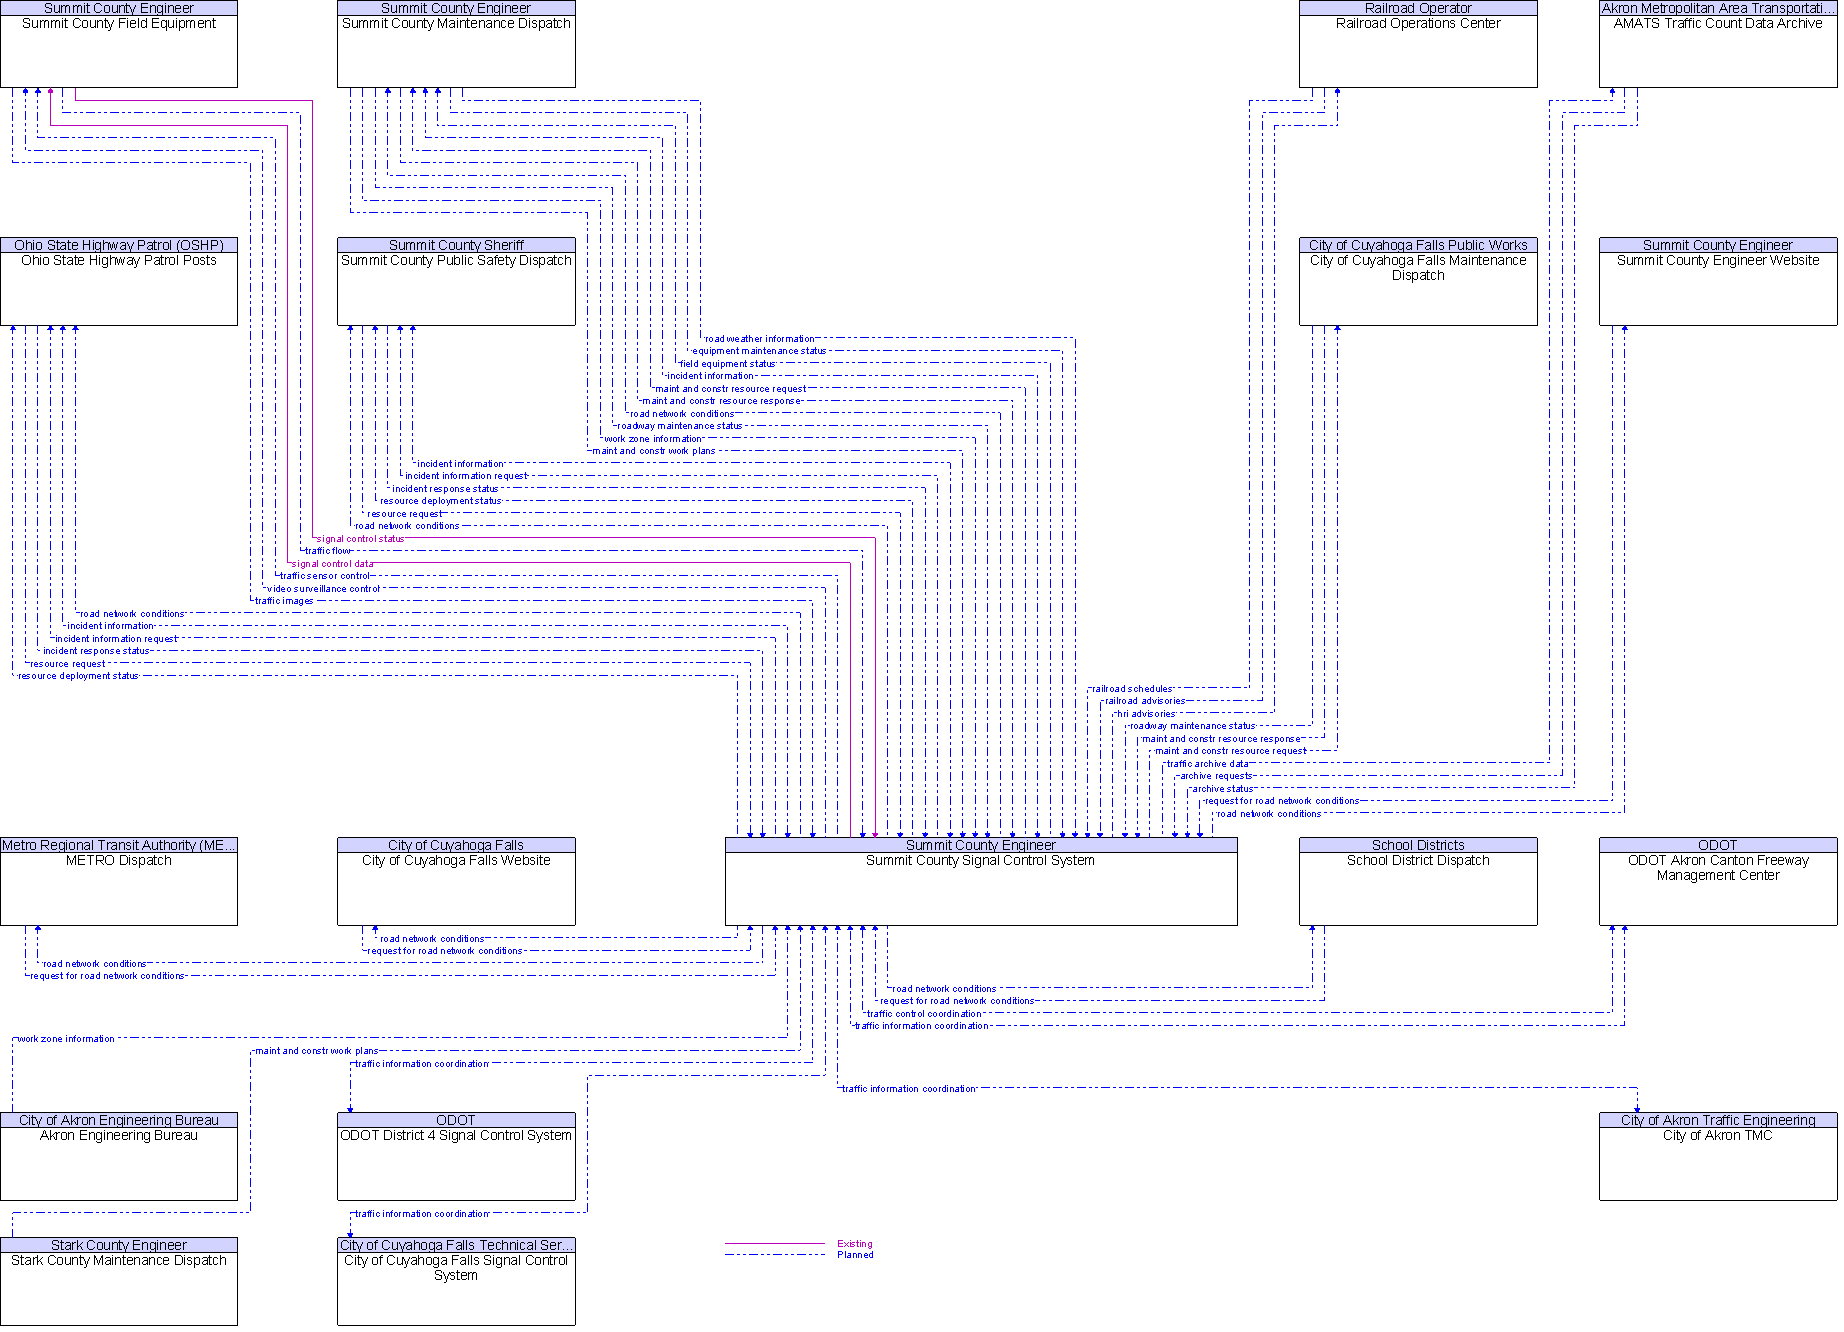 Context Diagram for Summit County Signal Control System